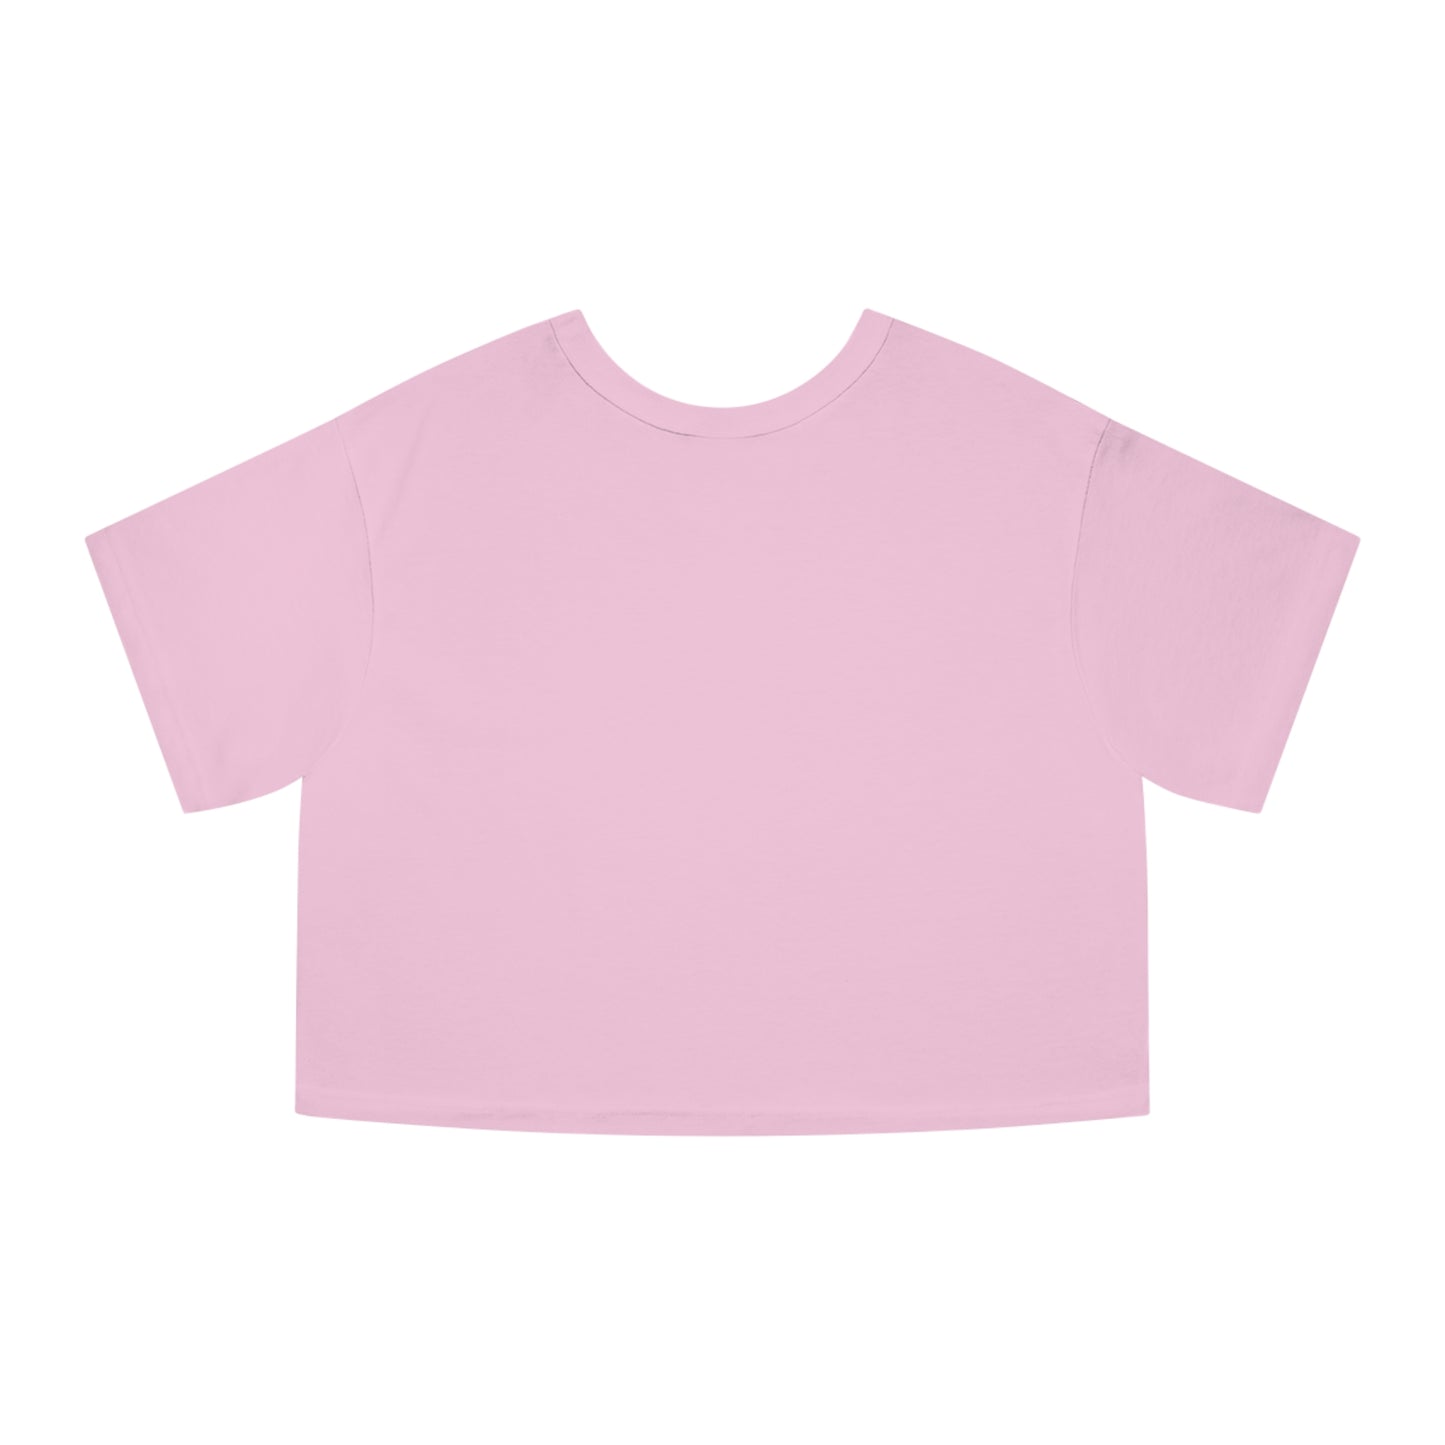 Open Mind | Champion Women's Heritage Cropped T-Shirt